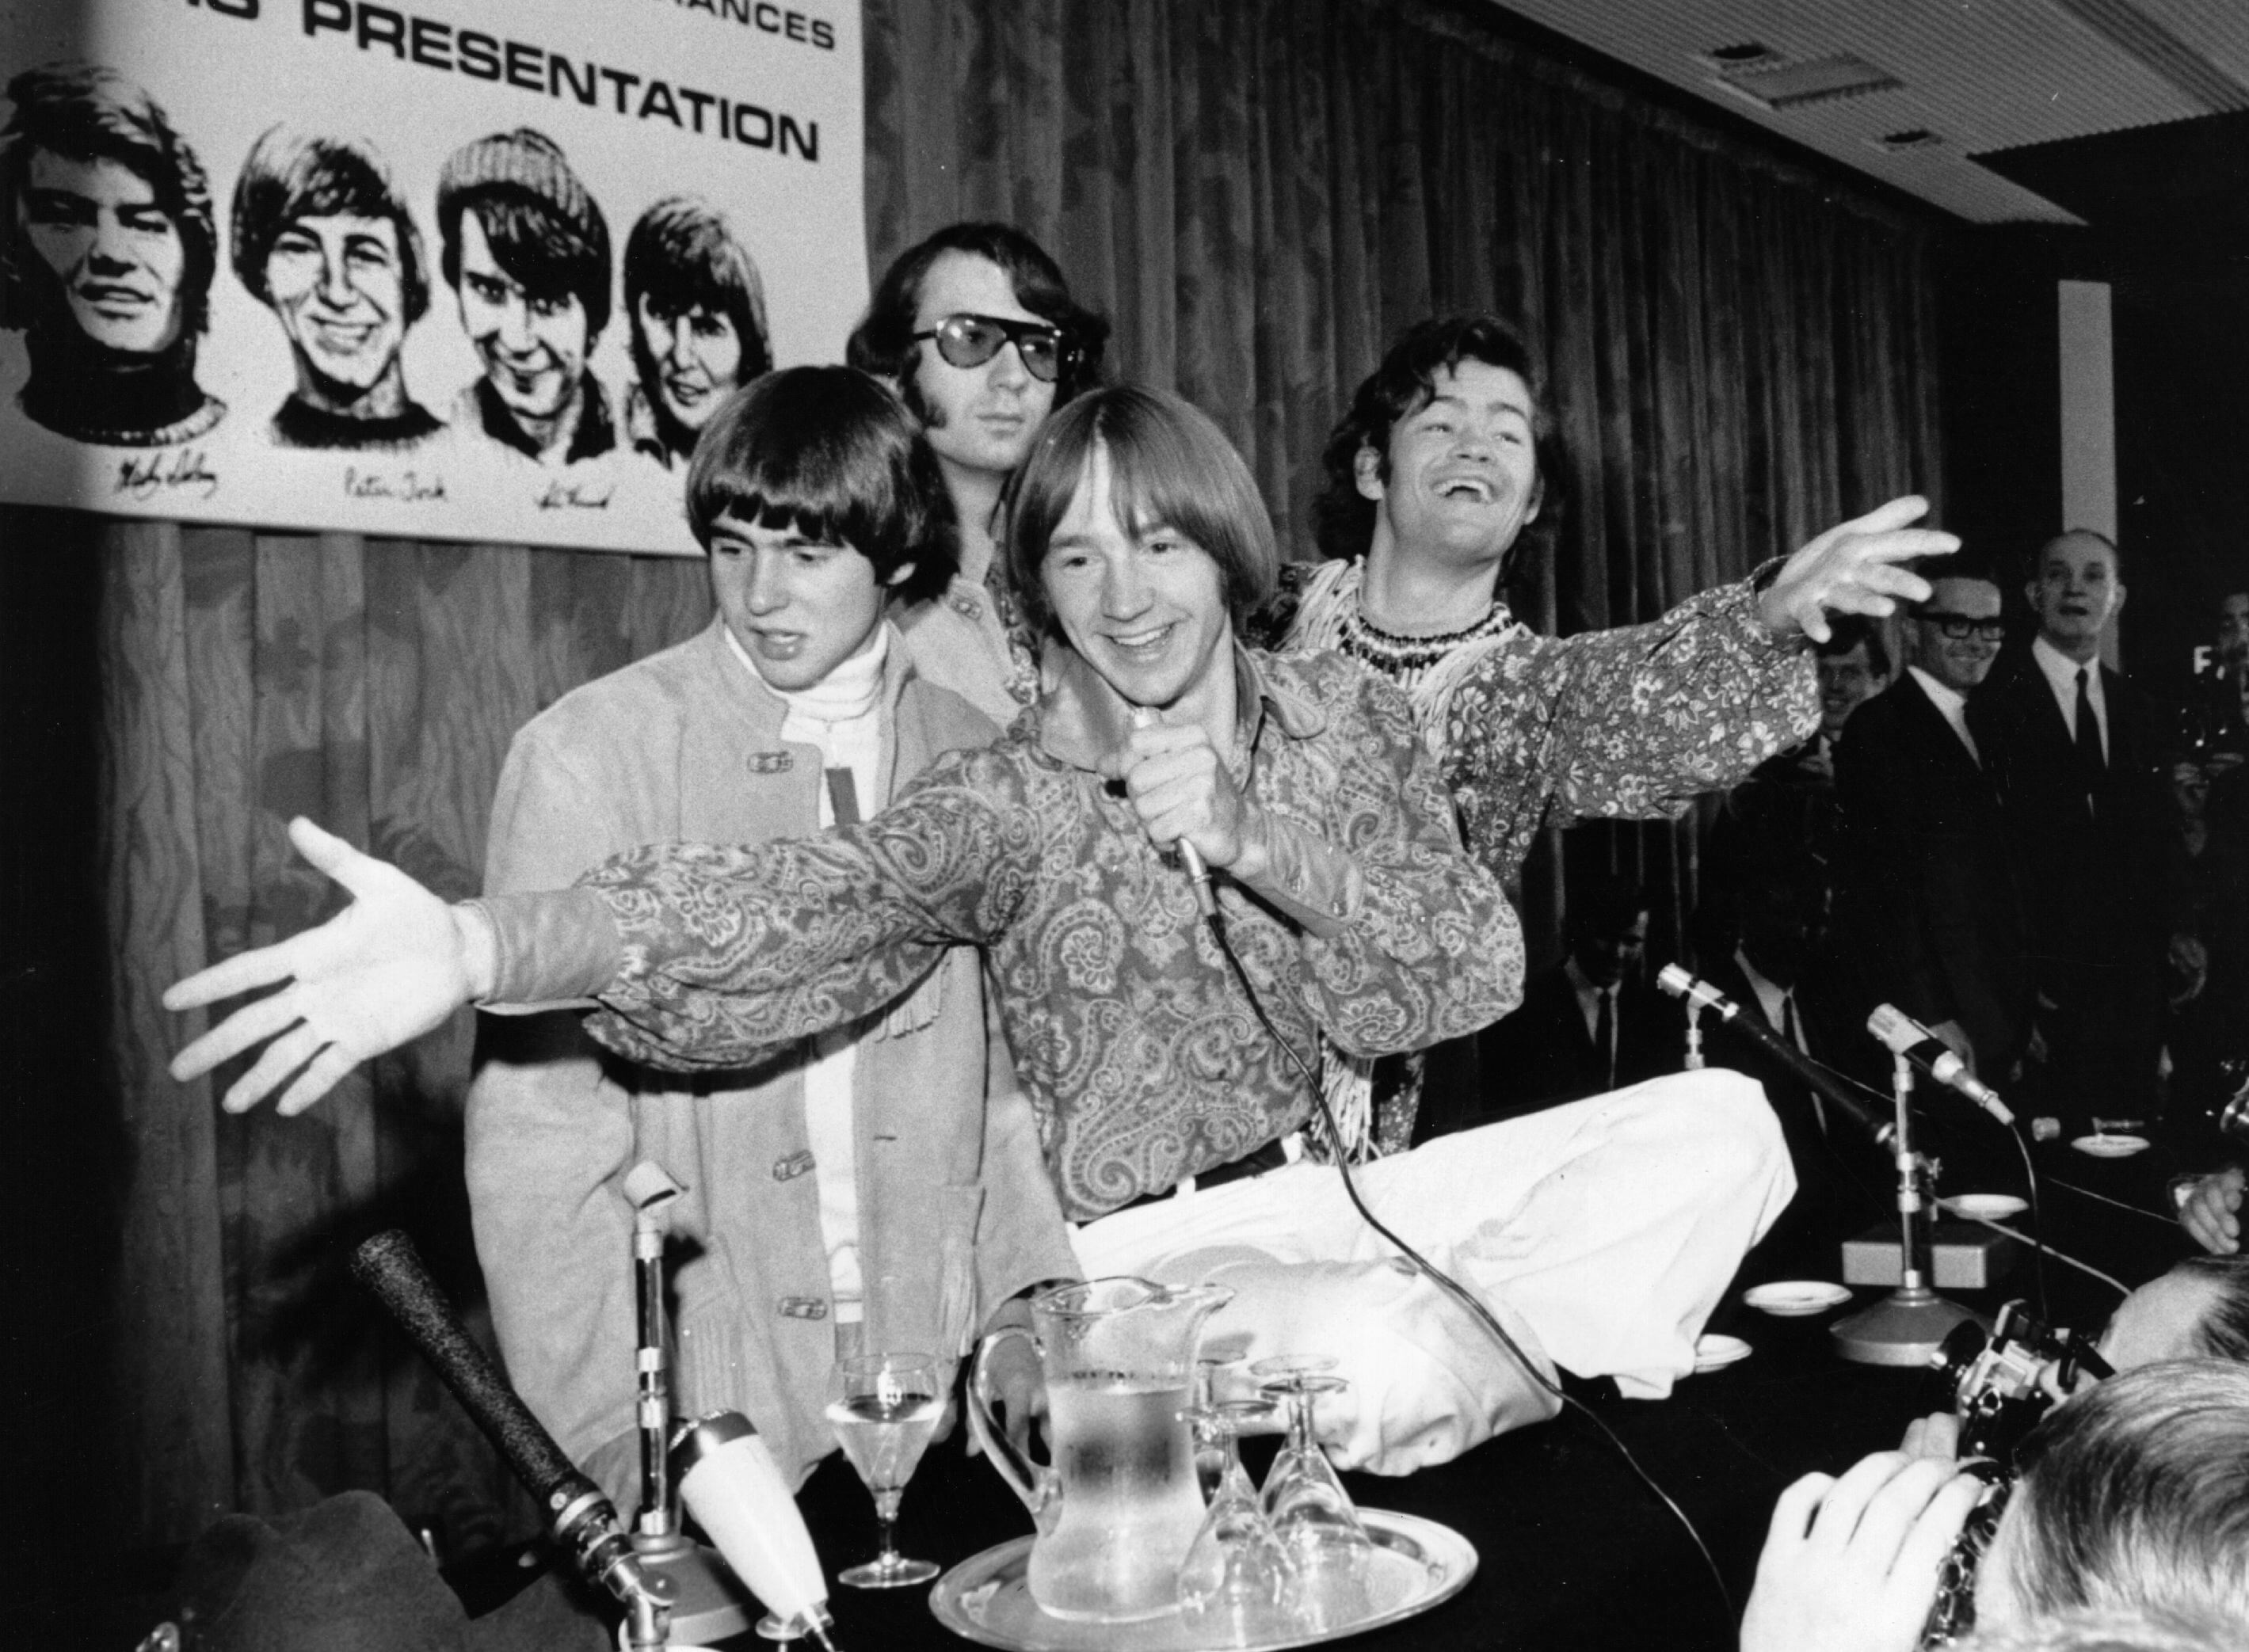 All members of The Monkees near a poster